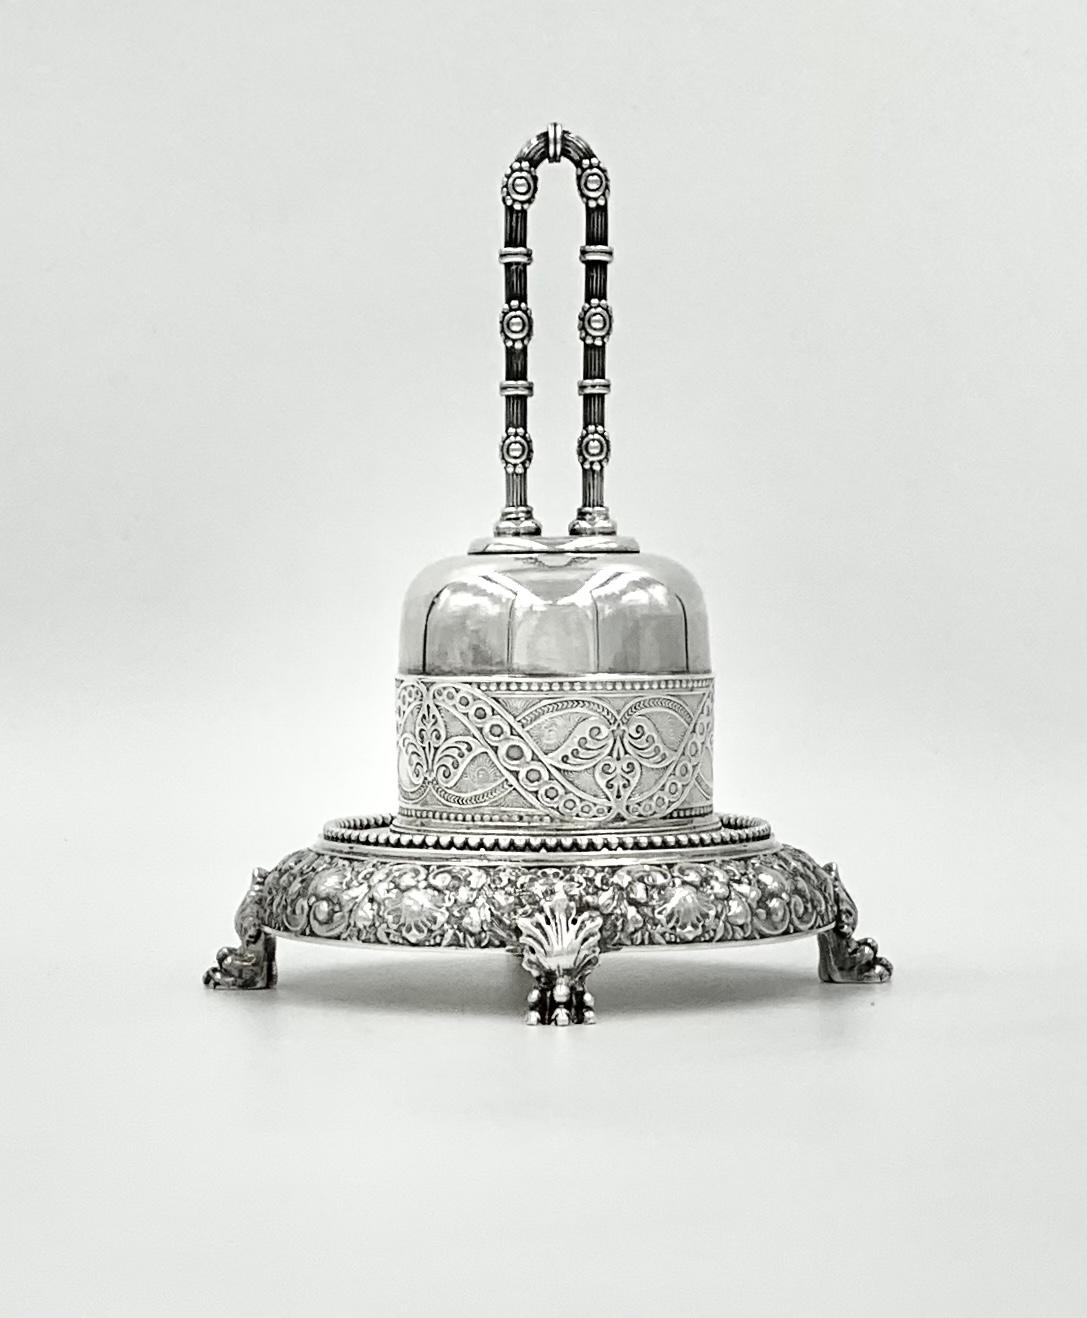 Antique Aesthetic Movement Tiffany & Co. Sterling Silver Bell on Stand 1873-1891 For Sale 6